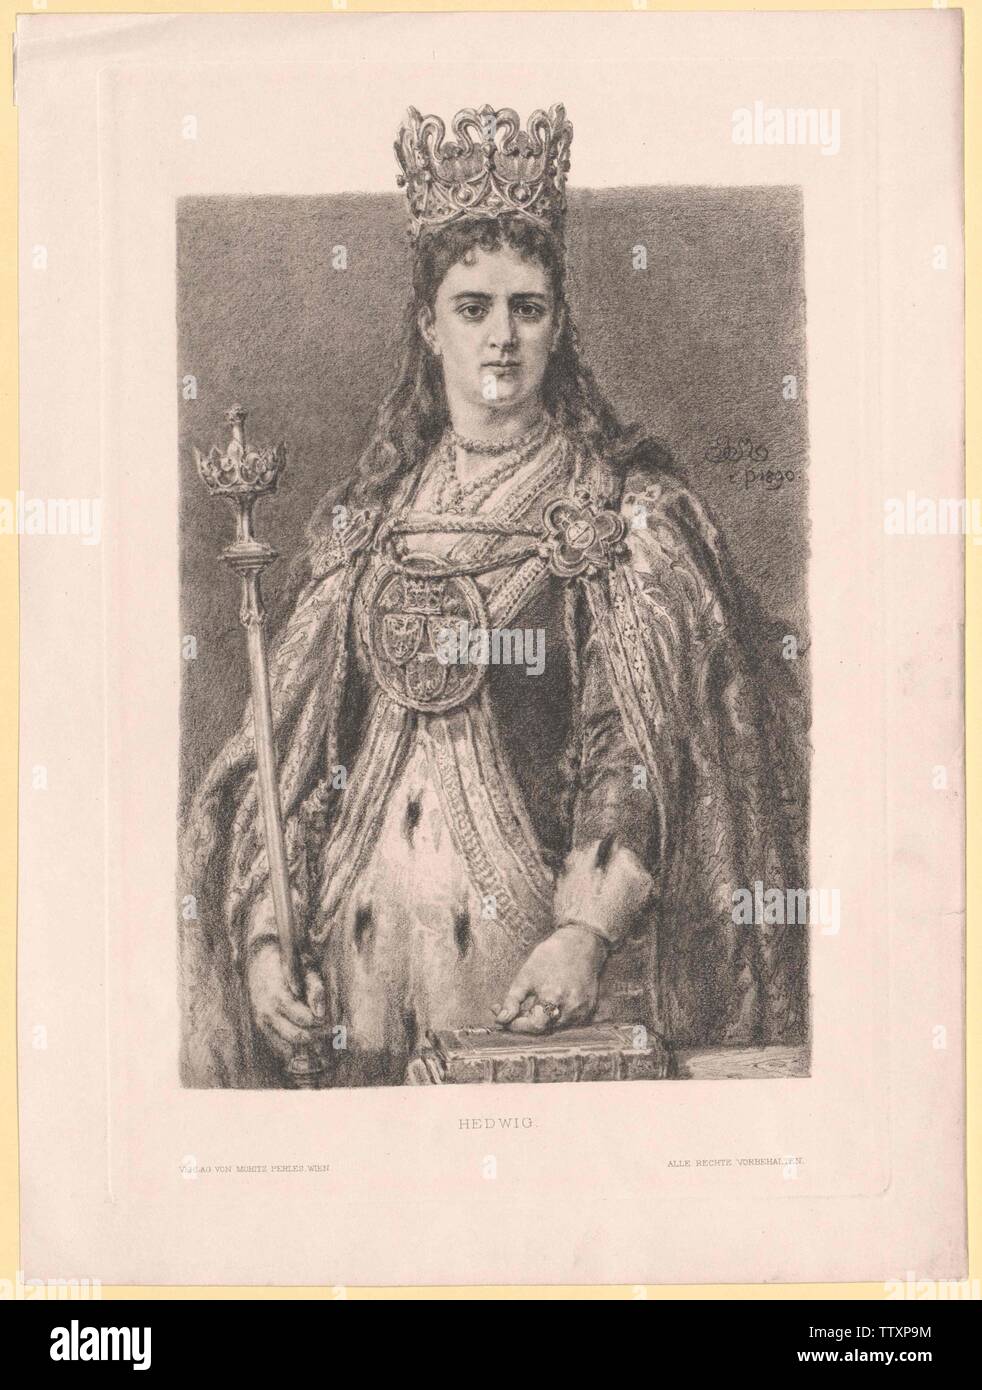 Jadwiga, Queen of Poland, Additional-Rights-Clearance-Info-Not-Available Stock Photo